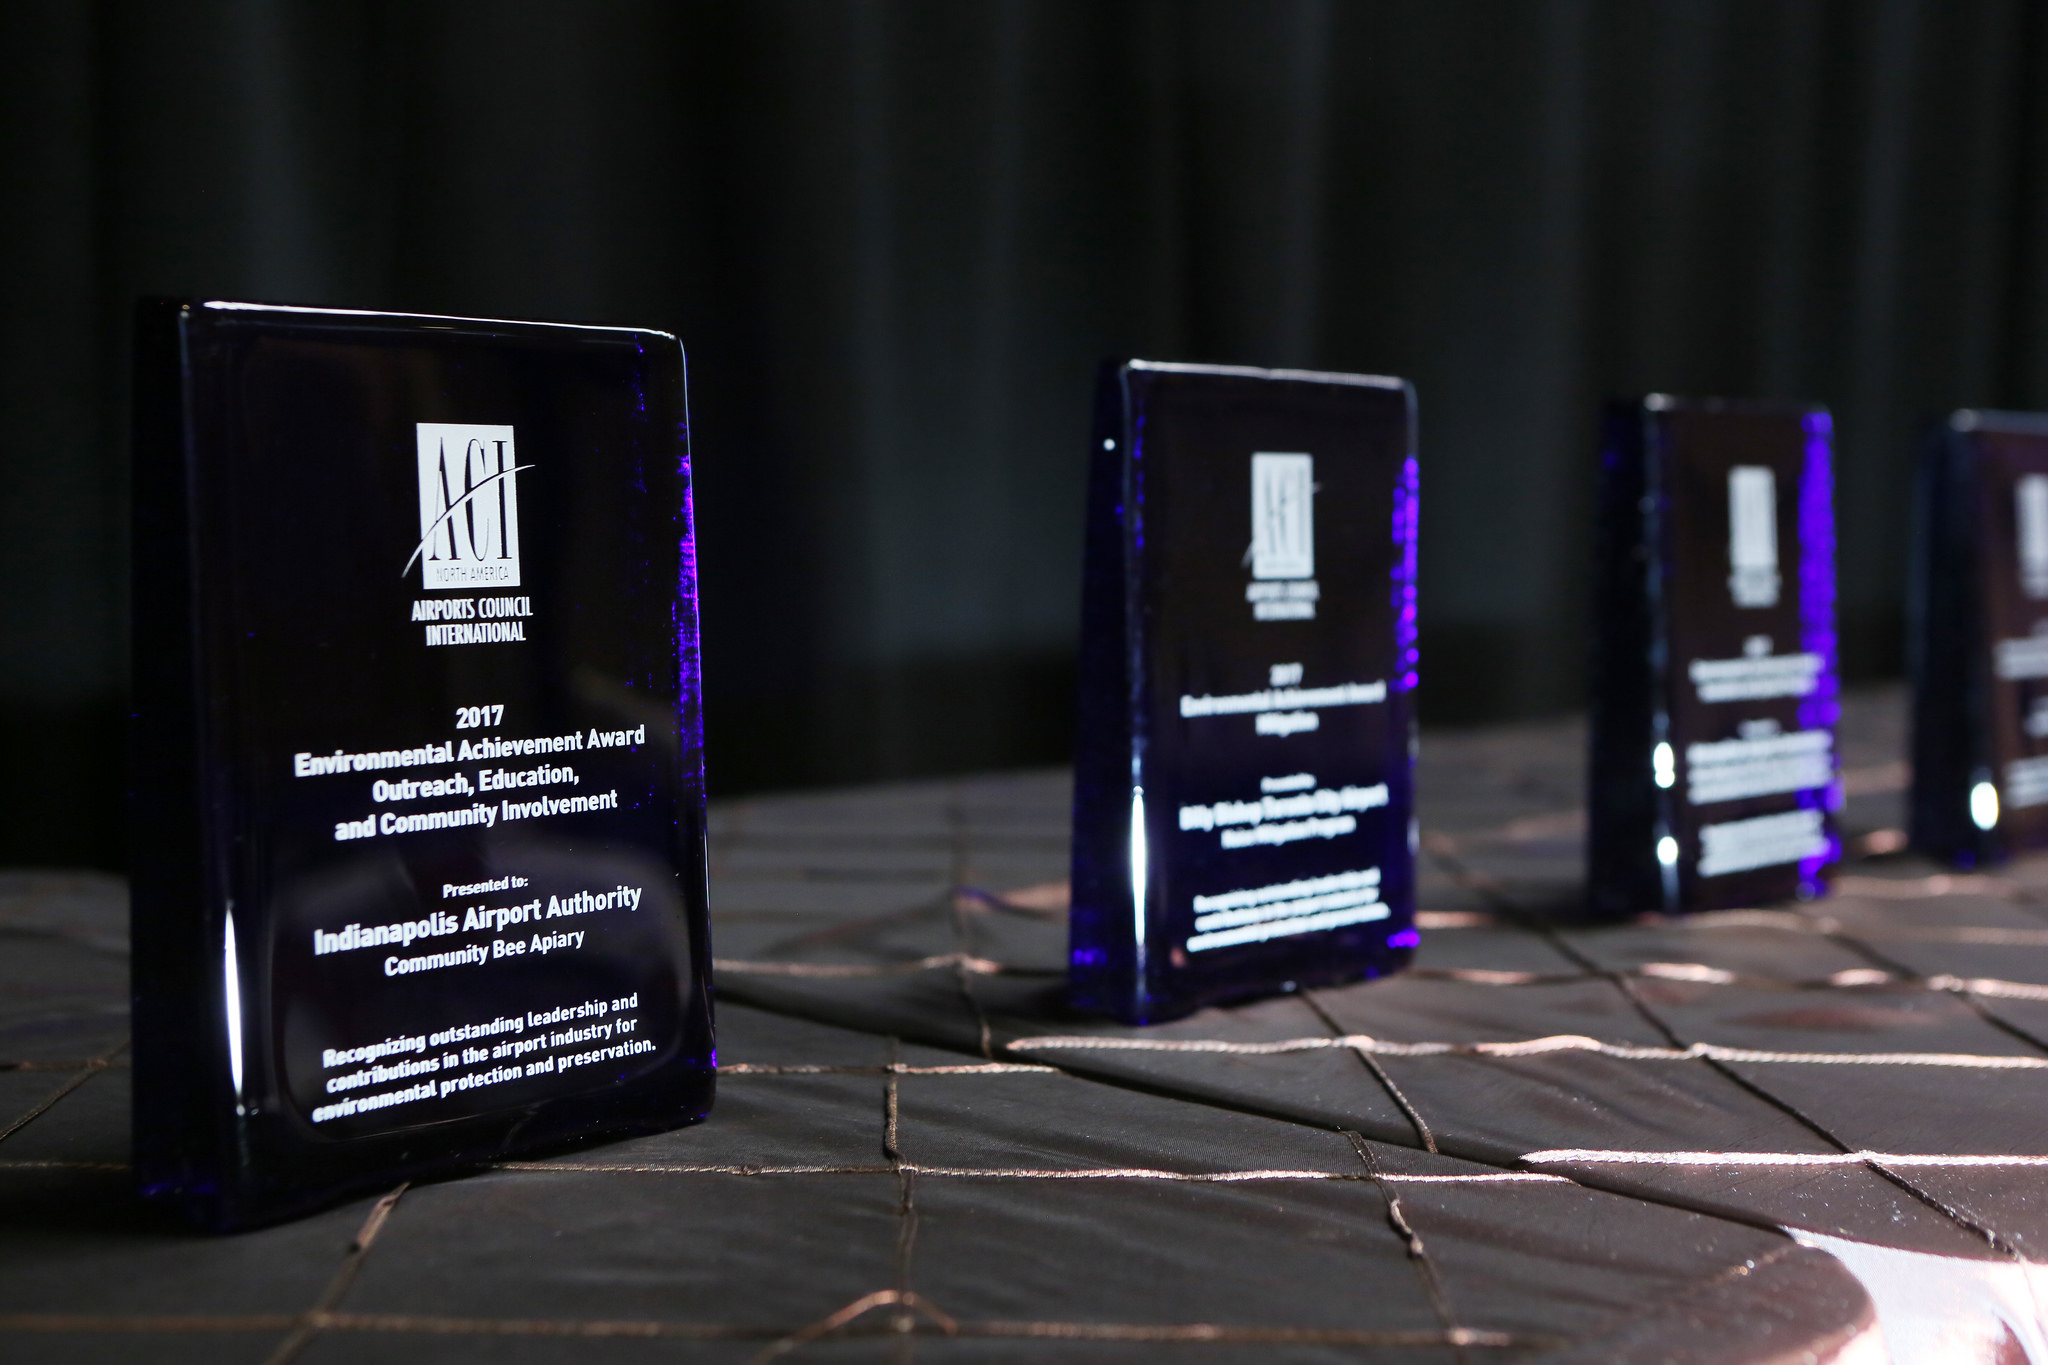 ACI-NA's Environmental Achievement Awards glass awards in a row on a table